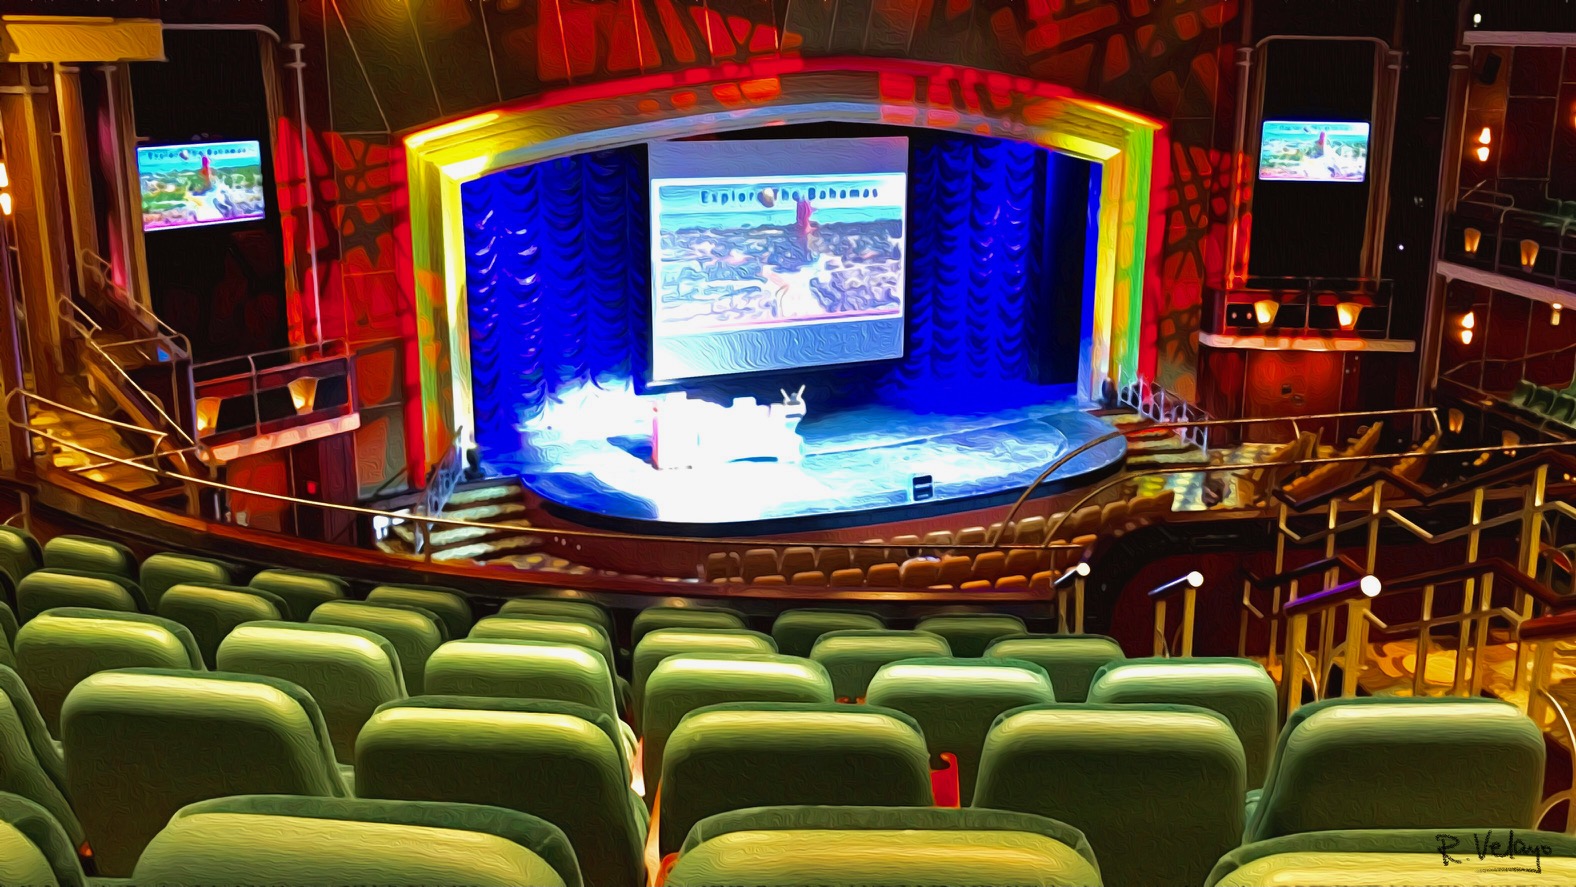 "ROYAL THEATER IN ROYAL CARIBBEAN’S NAVIGATOR OF THE SEAS" [Created: 6/01/2021]